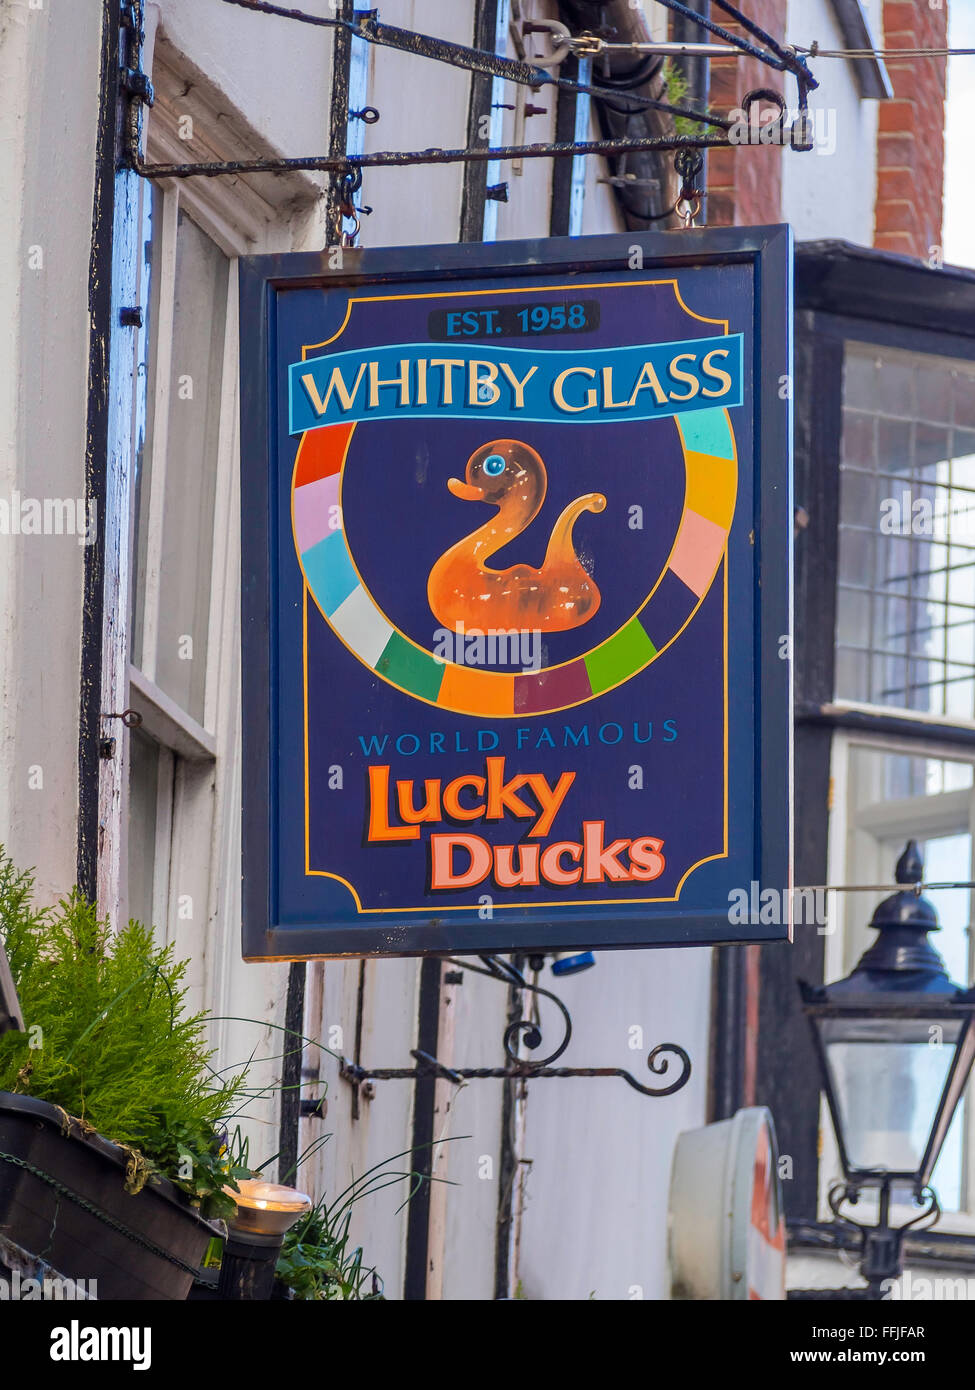 Shop sign of Whitby Glass World Famous Lucky Duck manufacturer and retailer of glass ornaments Whitby North Yorkshire Stock Photo